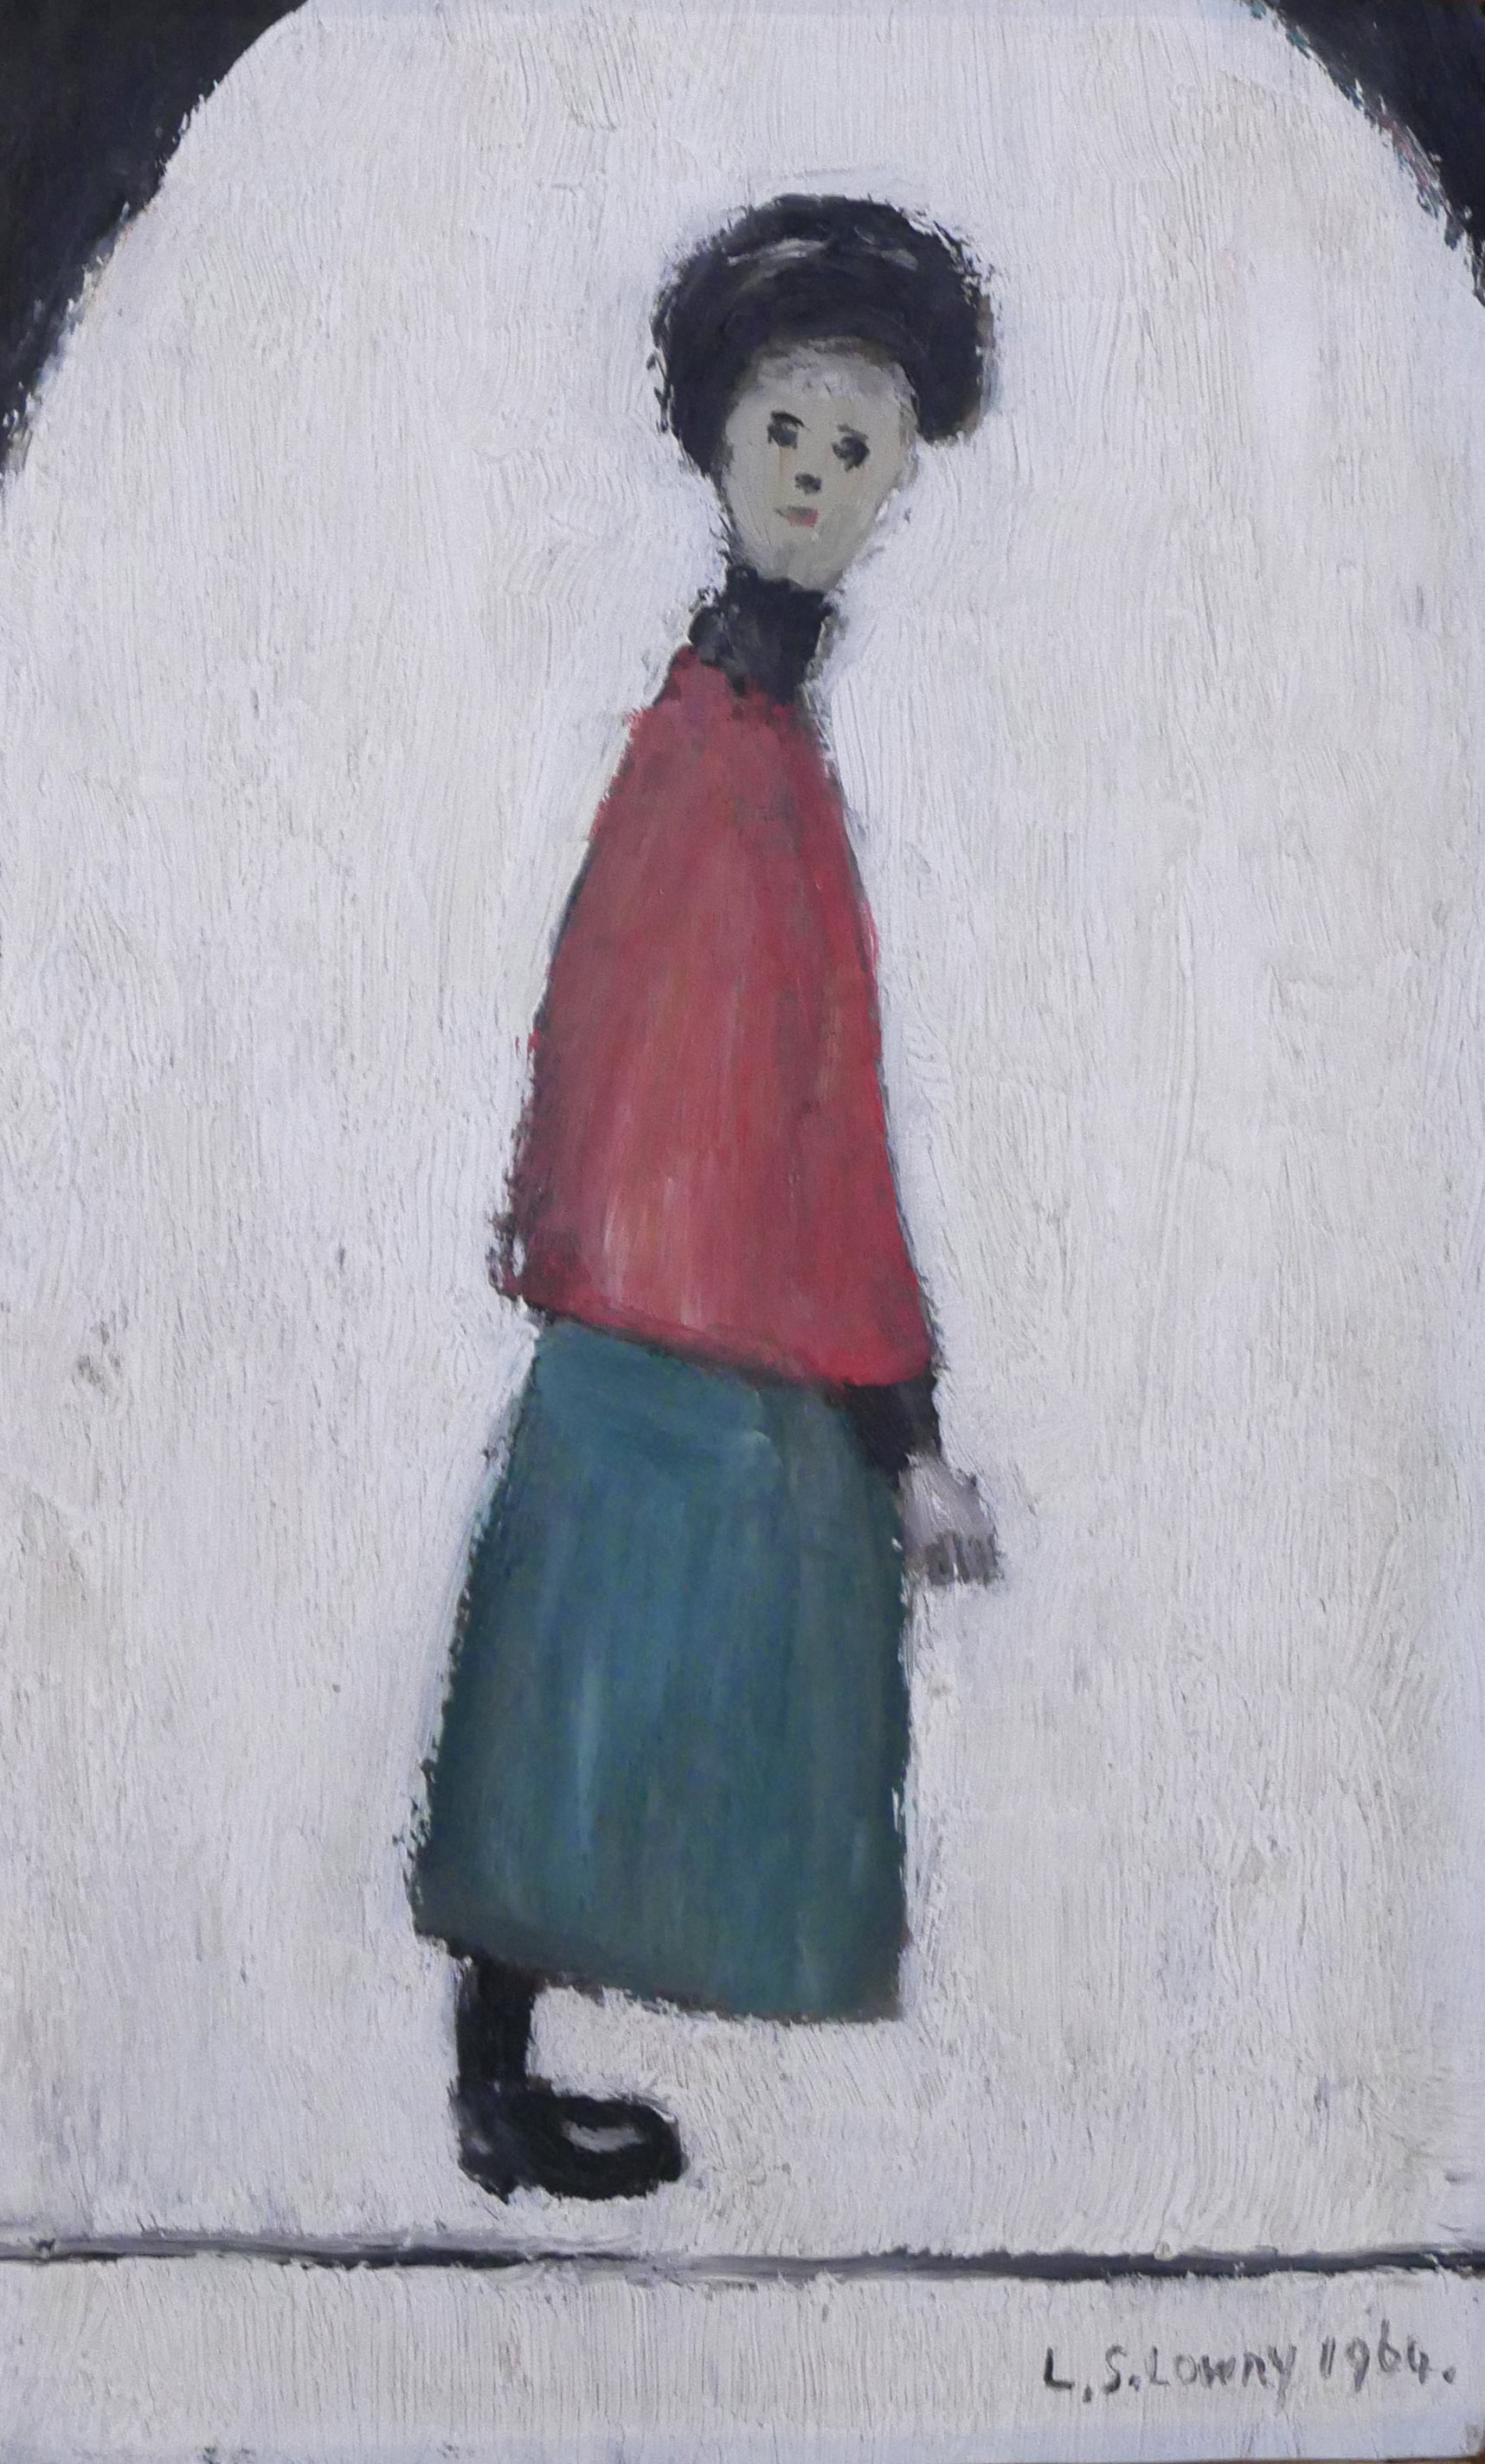 LAWRENCE STEPHEN LOWRY R.A., BRITISH, 1887 0 1976, OIL ON BOARD Titled 'Lady in Waiting', signed and